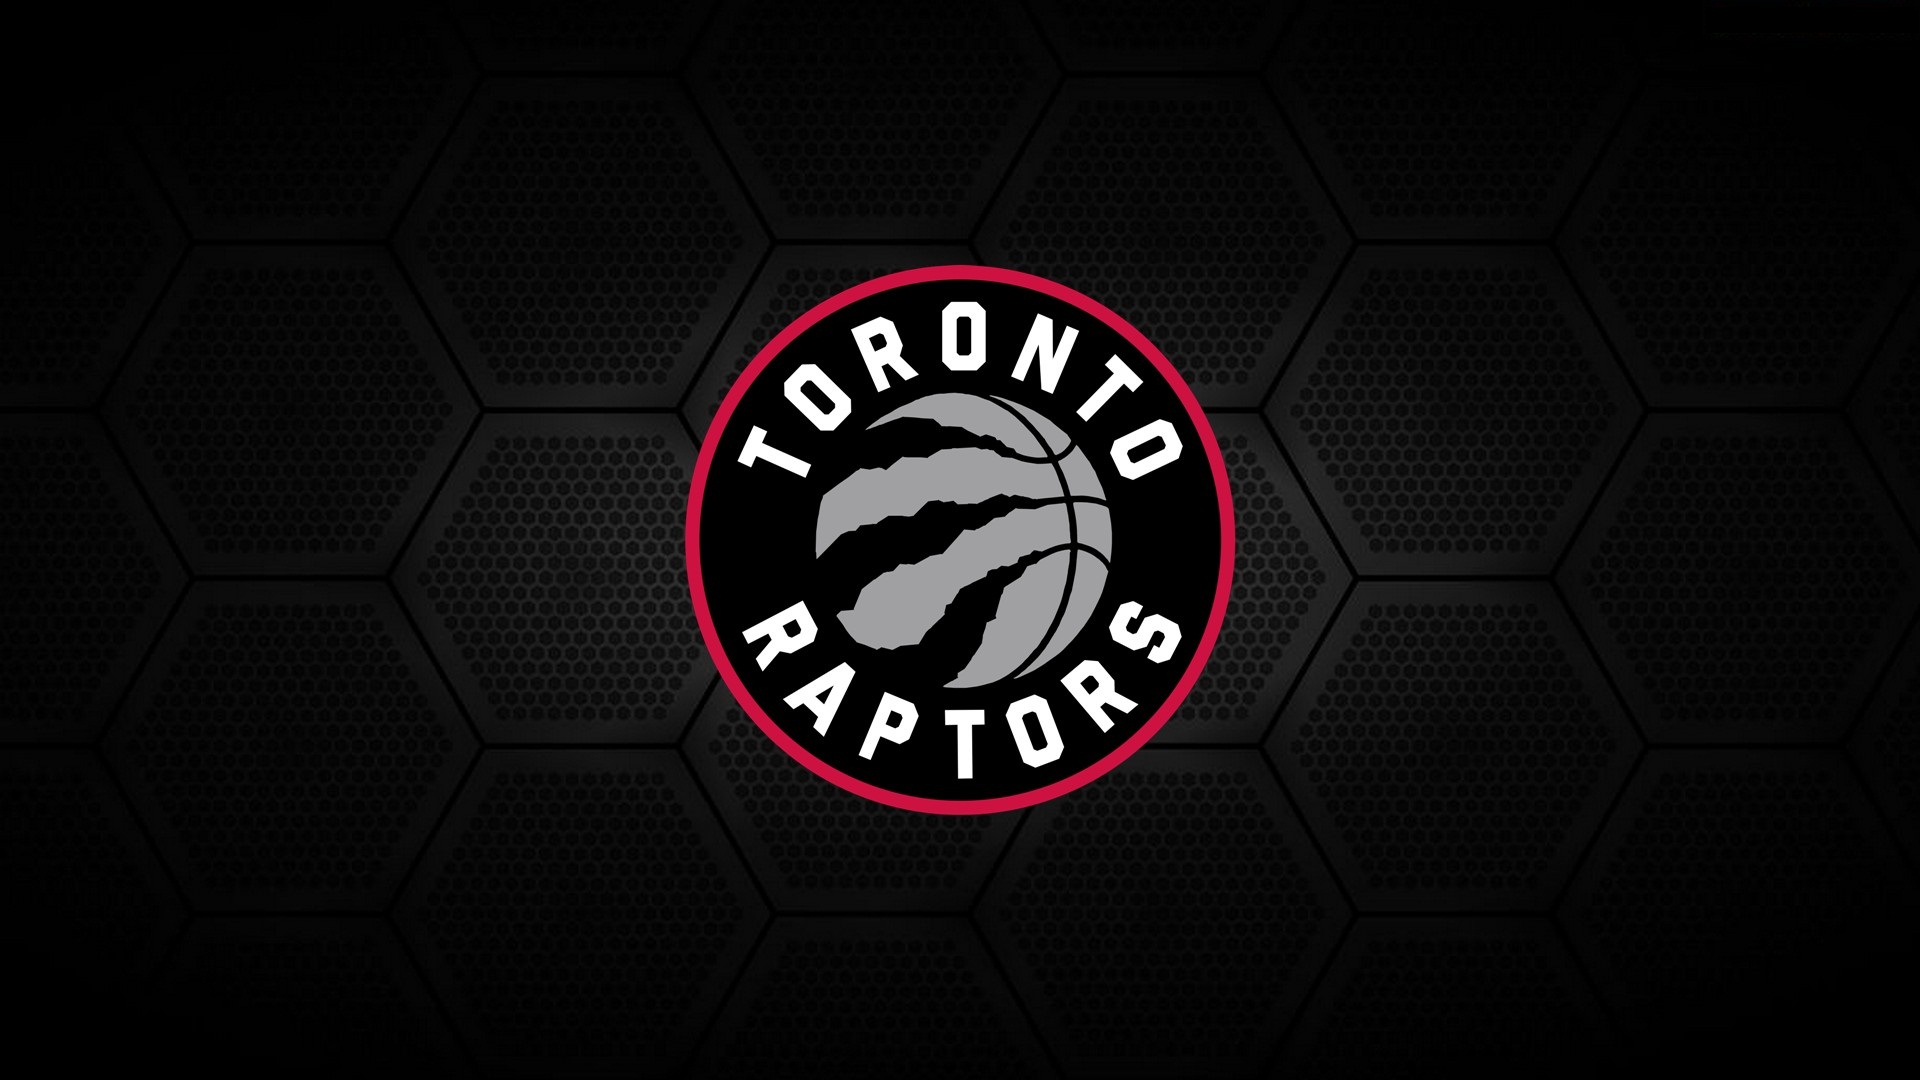 Backgrounds Basketball Toronto HD with image dimensions 1920x1080 pixel. You can make this wallpaper for your Desktop Computer Backgrounds, Windows or Mac Screensavers, iPhone Lock screen, Tablet or Android and another Mobile Phone device